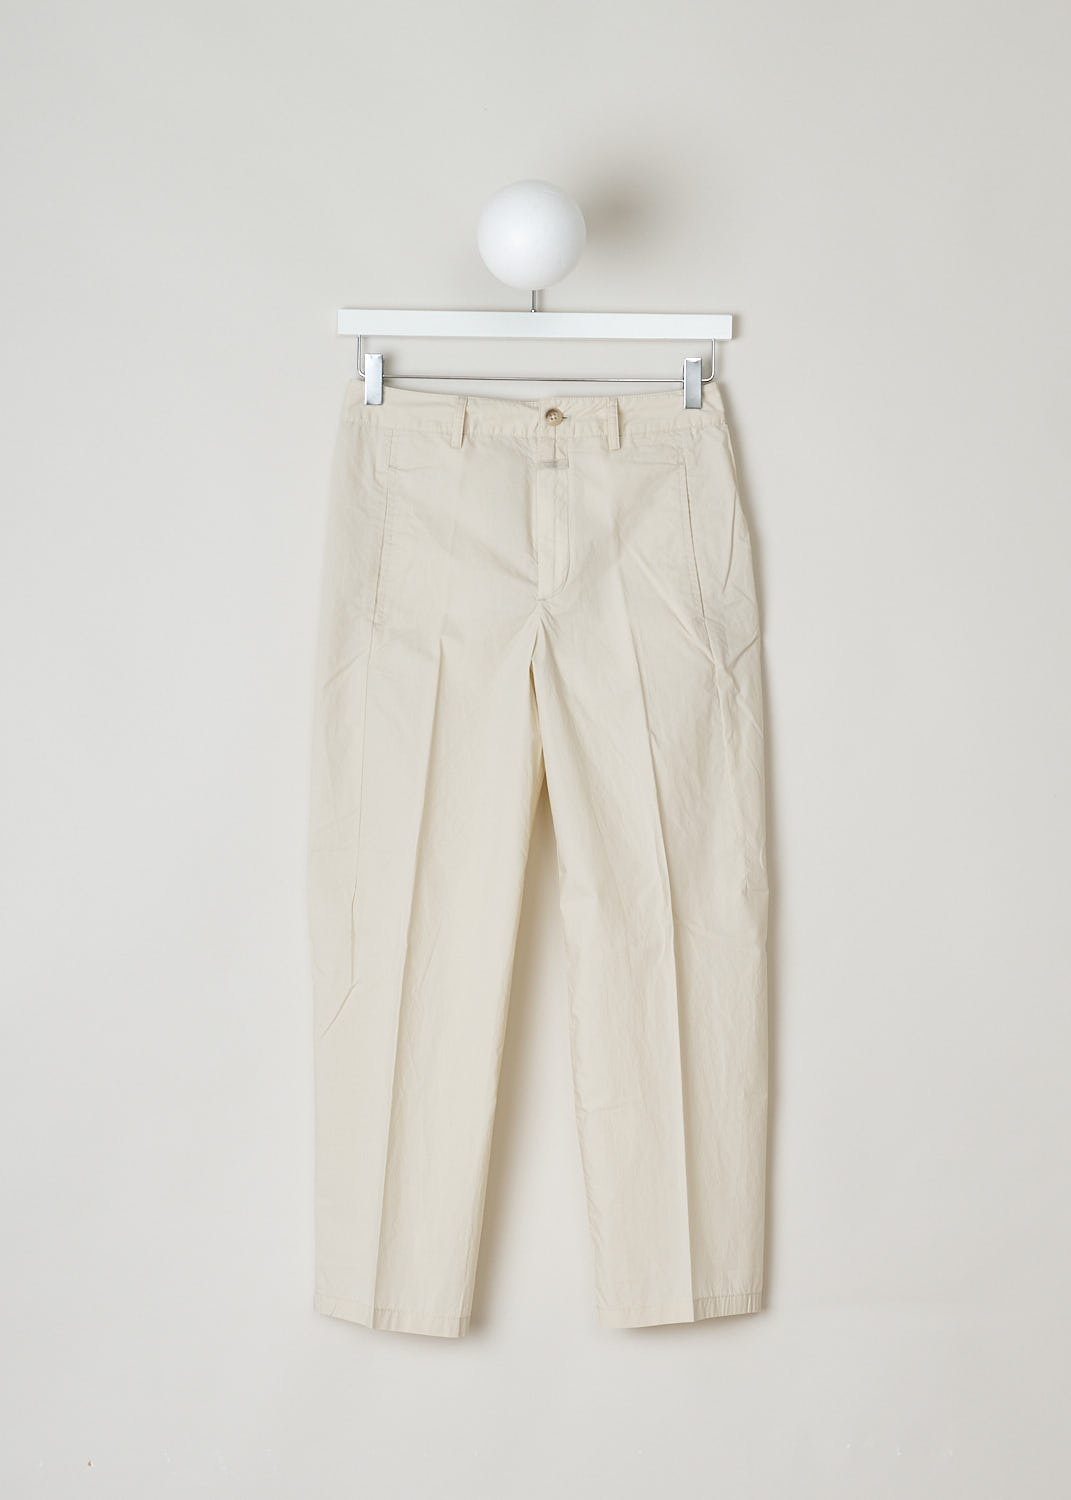 CLOSED, LIGHTWEIGHT BEIGE TROUSERS, LUDWIG_C9145_53A_22_259, Beige, Front, These lightweight beige trousers feature a regular length, two forward slanted pockets on the front and two welt pockets on the back.